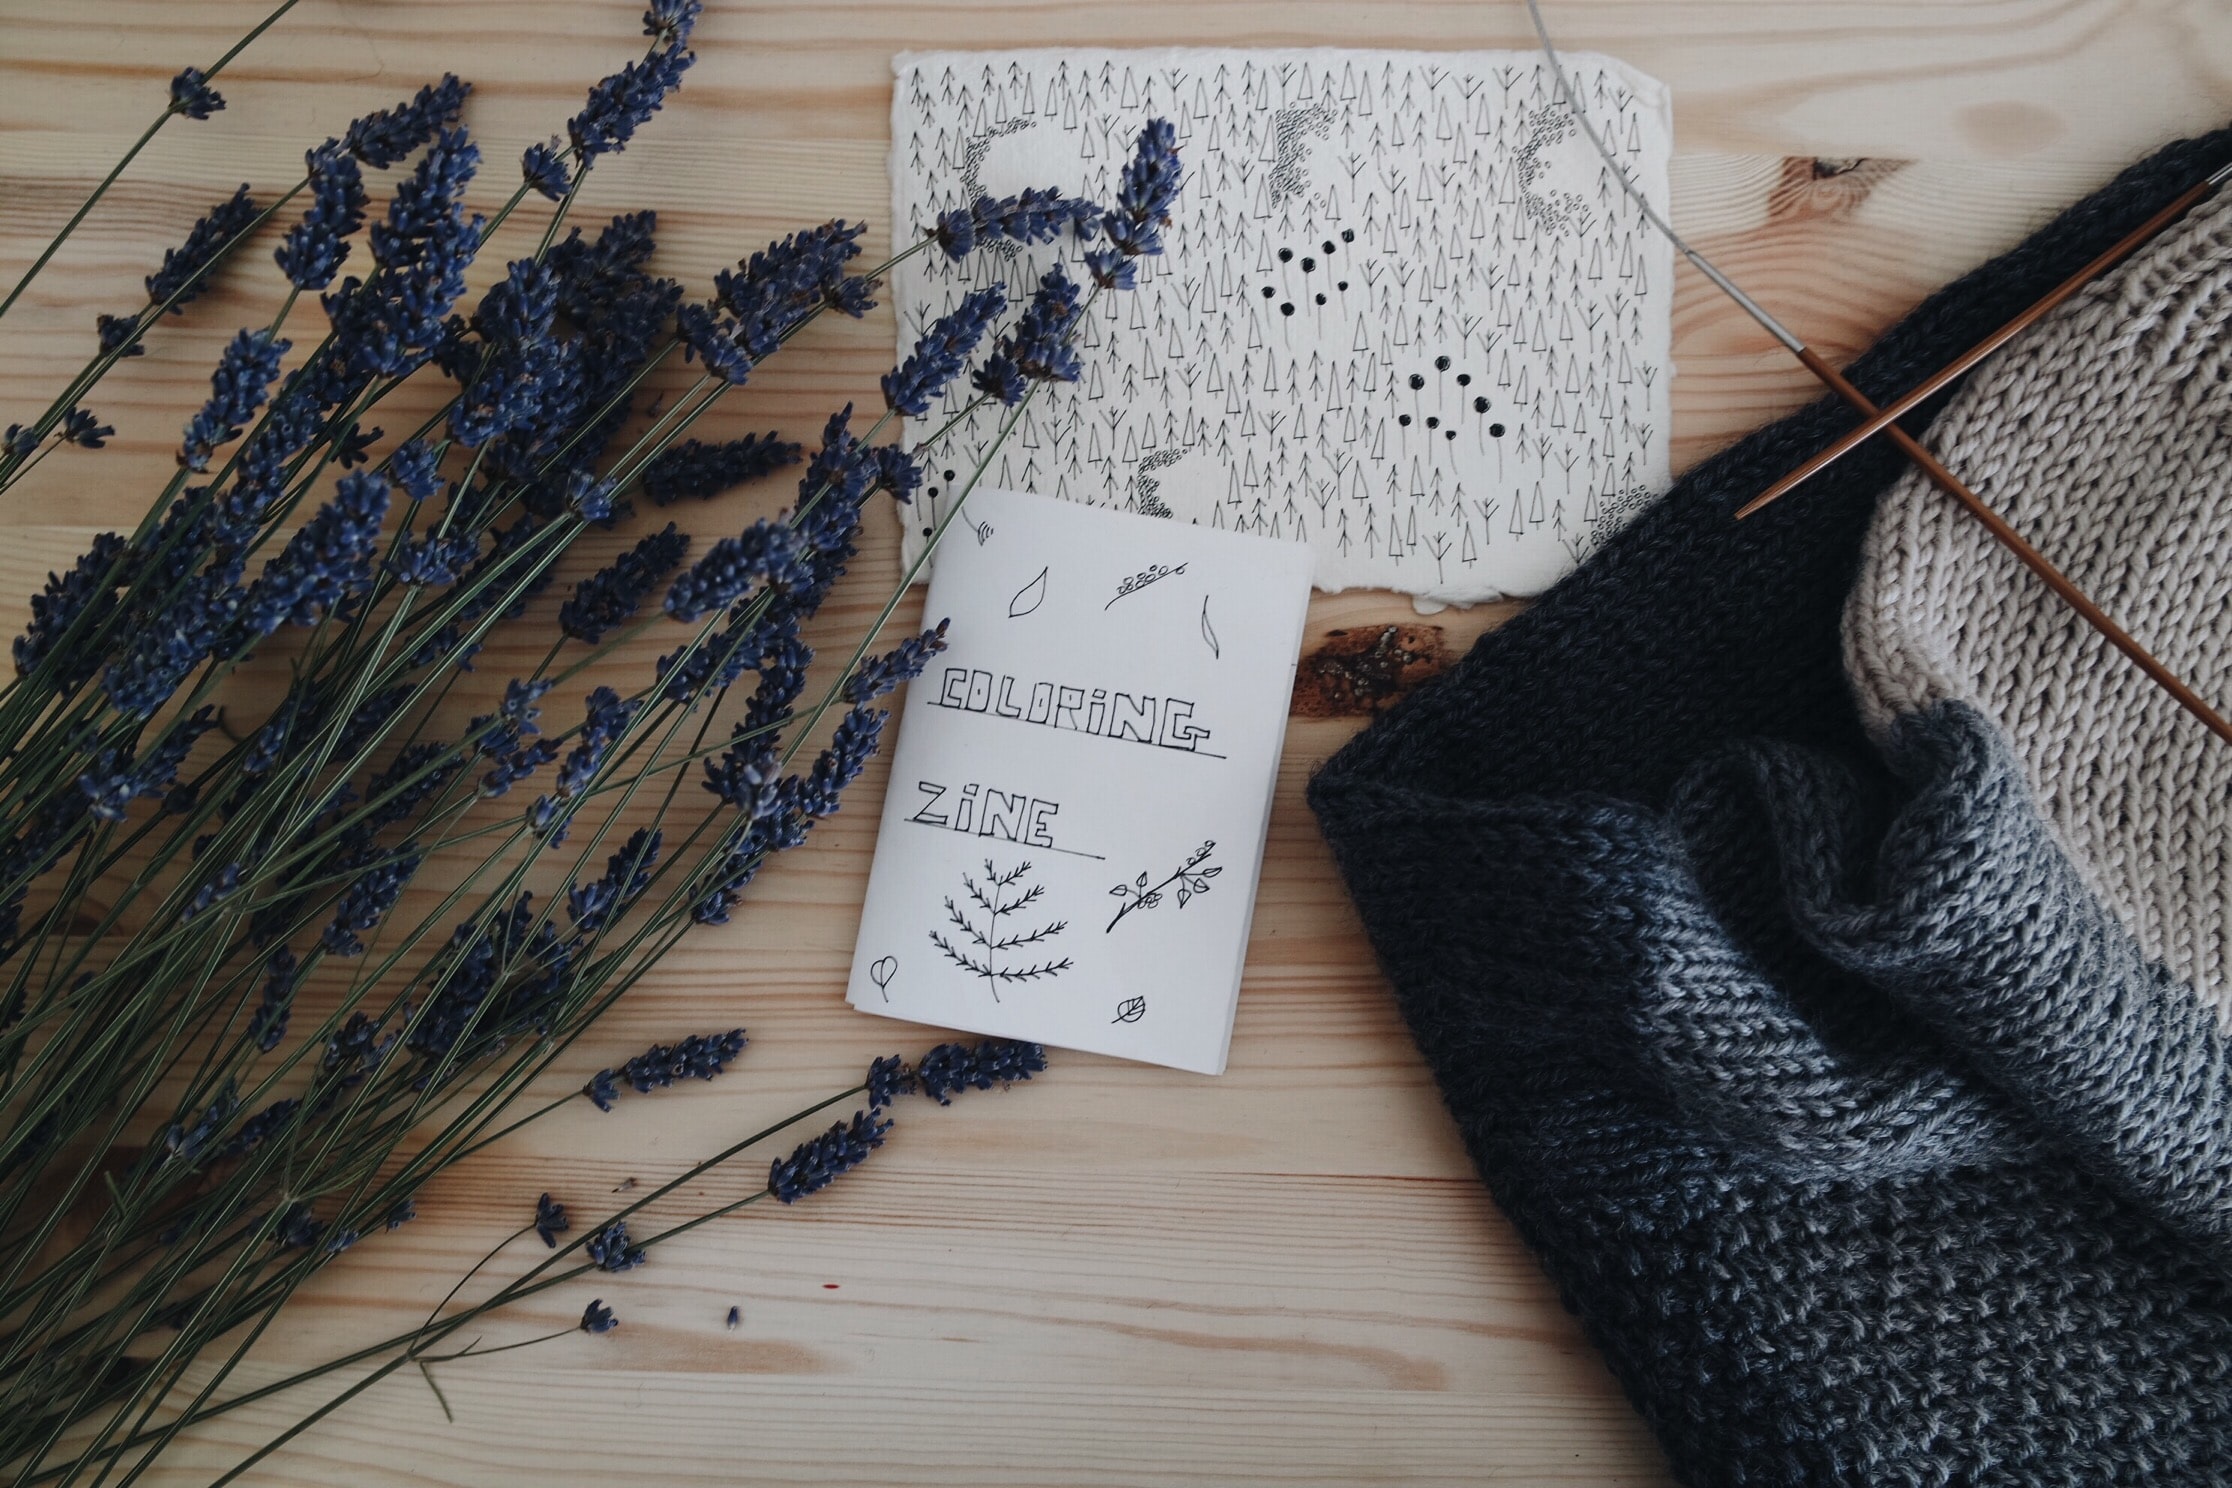 A small, hand-drawn paper zine is laid out on a wooden table next to some stalks of lavender and a wool scarf